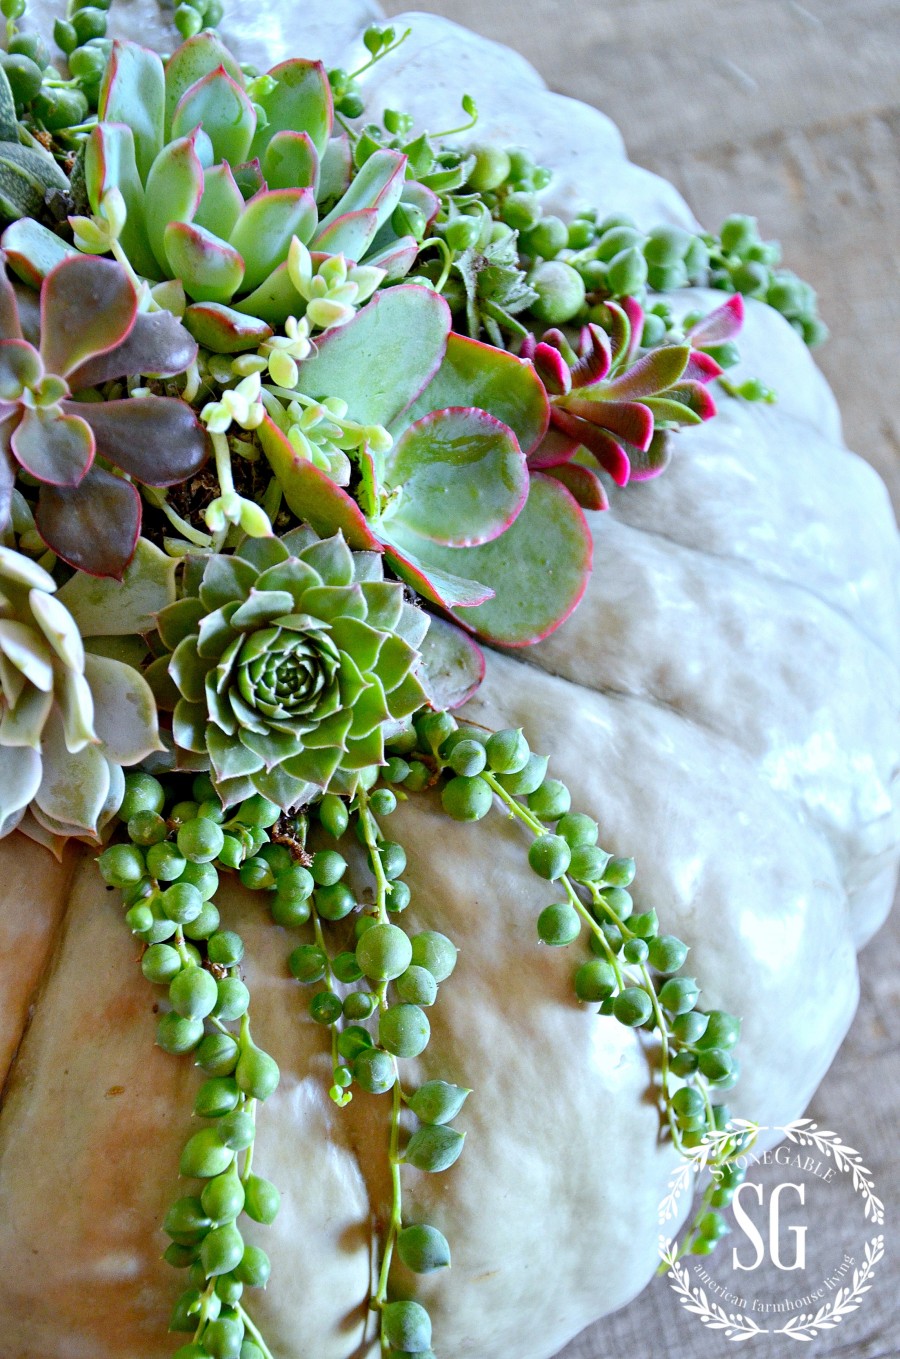 SUCCULENT TOPPED PUMPKINS-An easy and show stopping way to decorate a pumpkin!